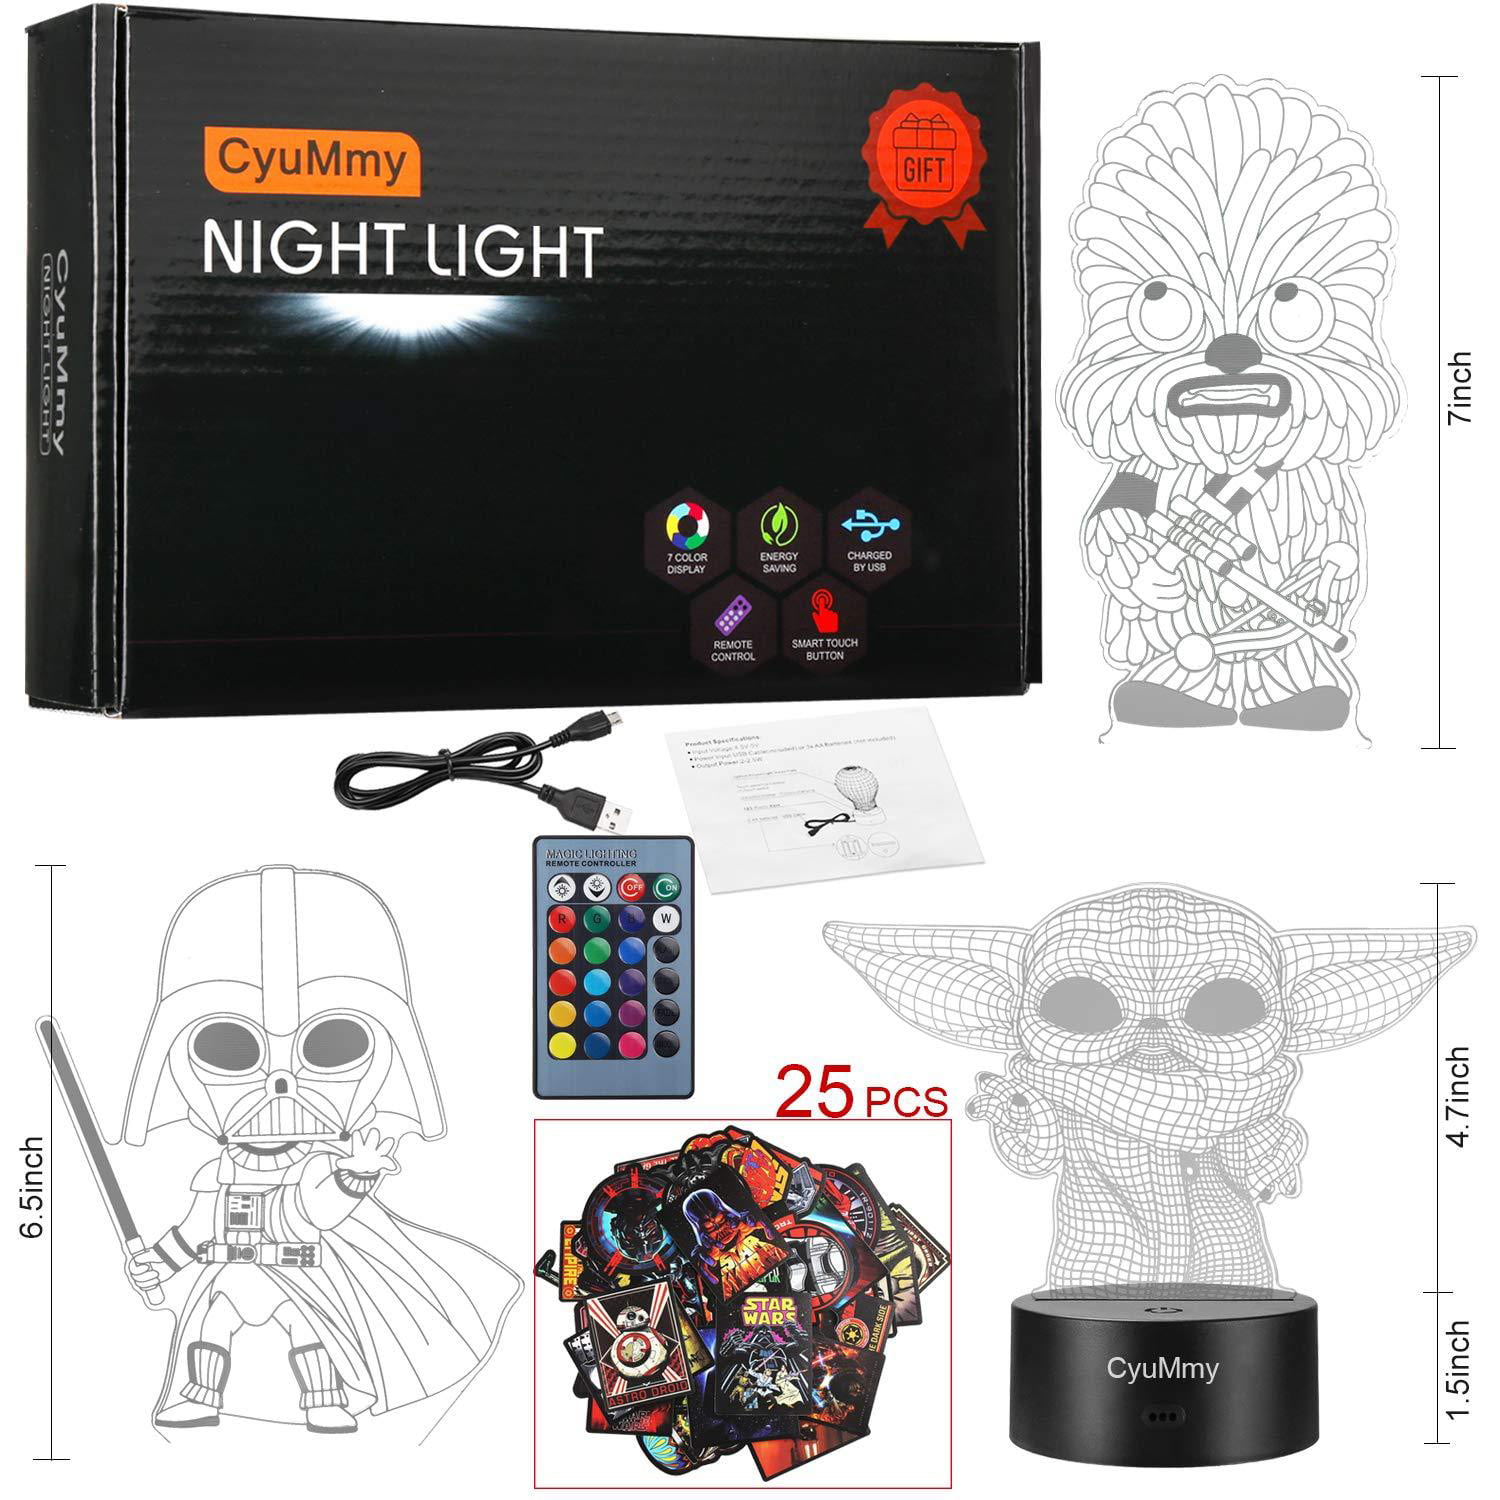 3D Illusion Star Wars Night Light for Kids, 3 Pattern and 16 Color Change  Decor Lamp - Star Wars Toys and Gifts for Boys Girls and Any Star Wars Fans